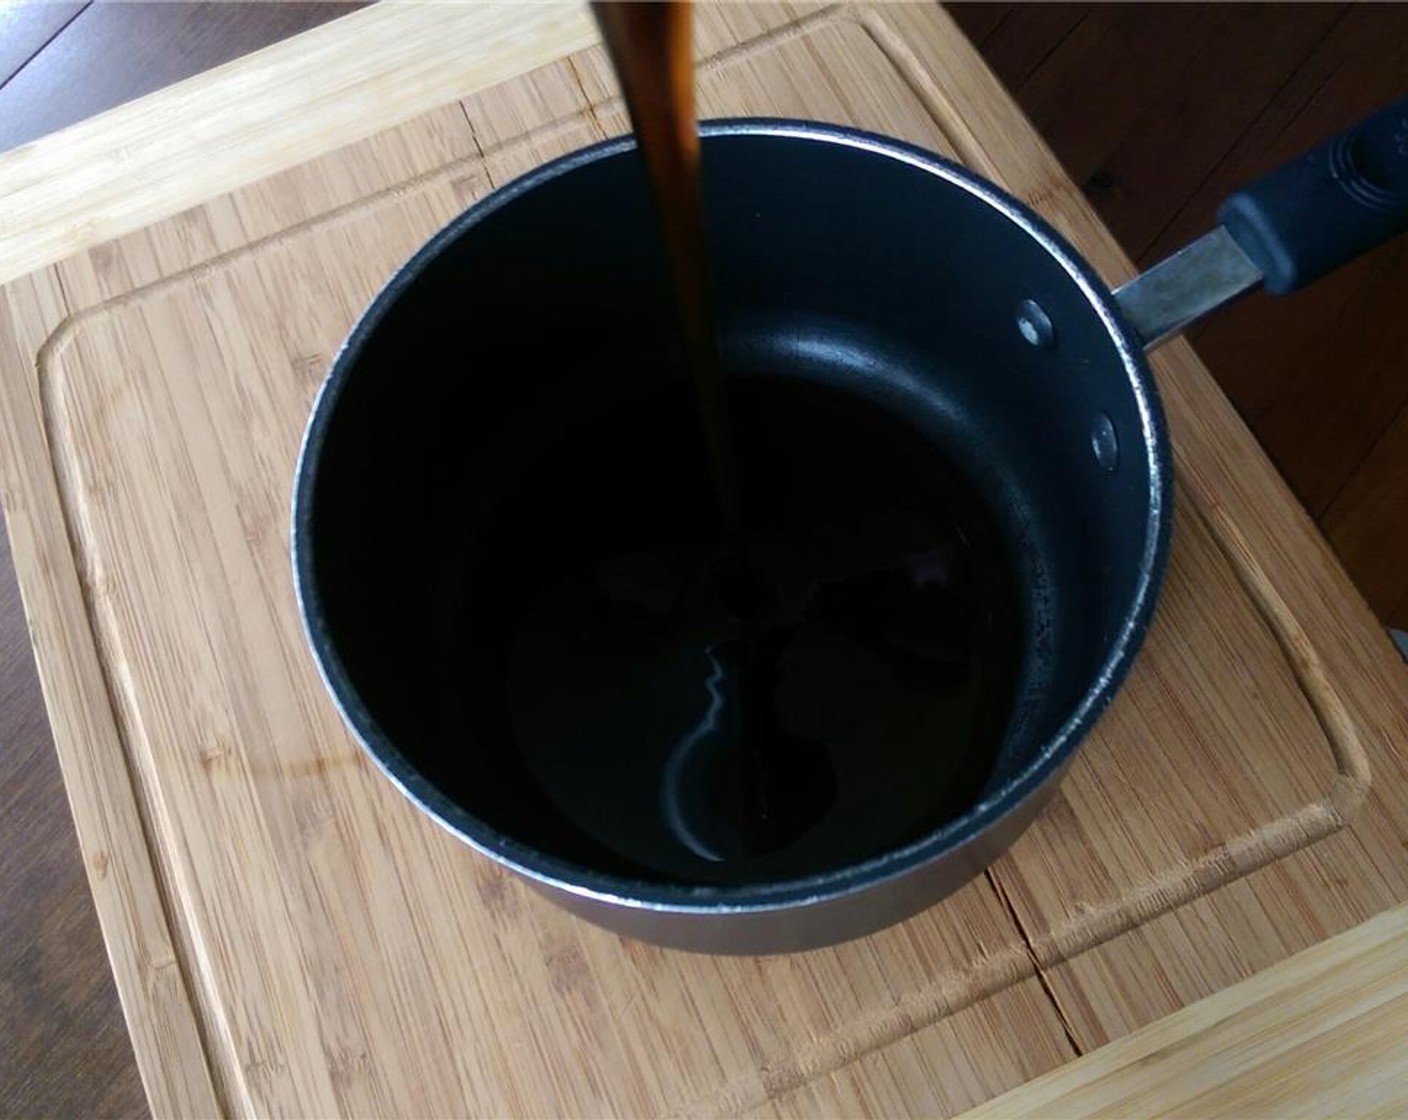 step 2 Place Maple Syrup (3/4 cup) in a 4 quart pot over medium hear to reduce down to 1/2 cup. Takes about 8 minutes, stir occasionally.